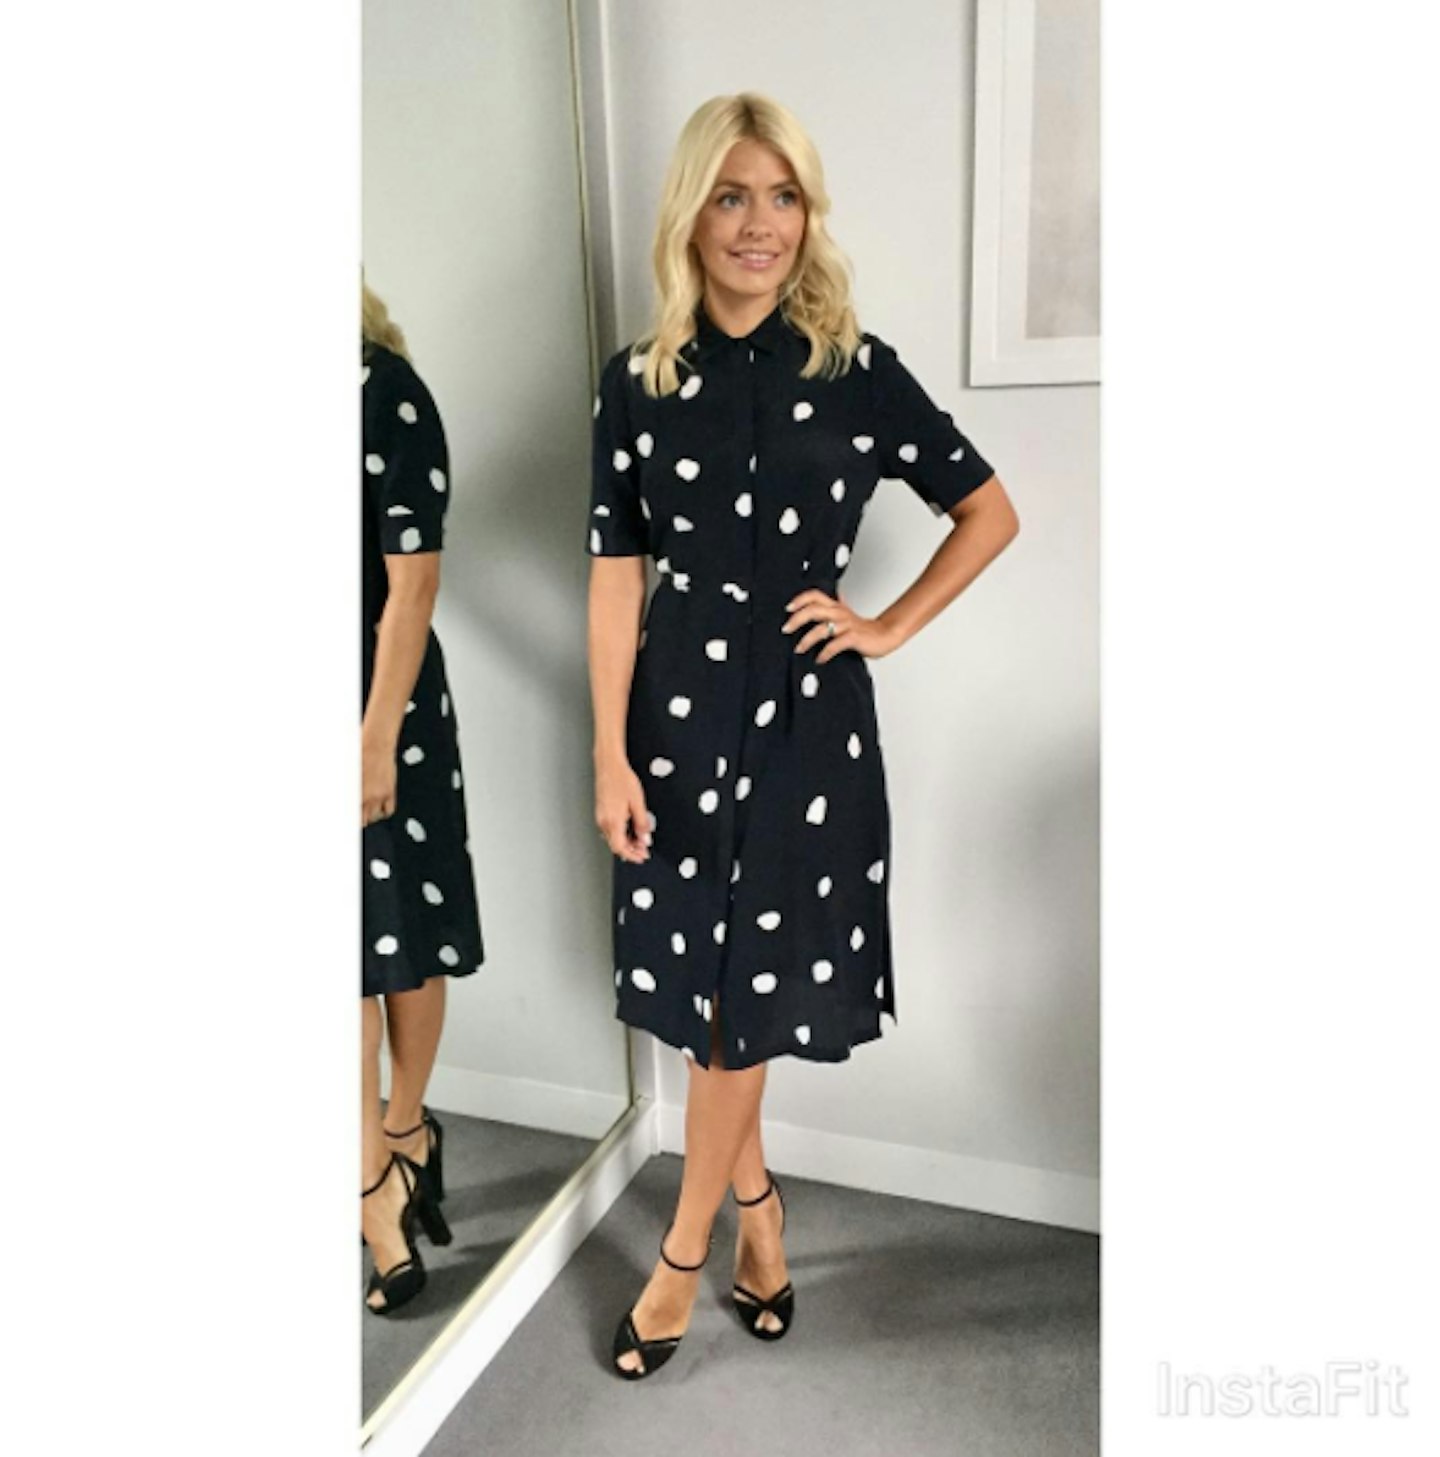 Holly Willoughby This Morning Outfit June 6 2017